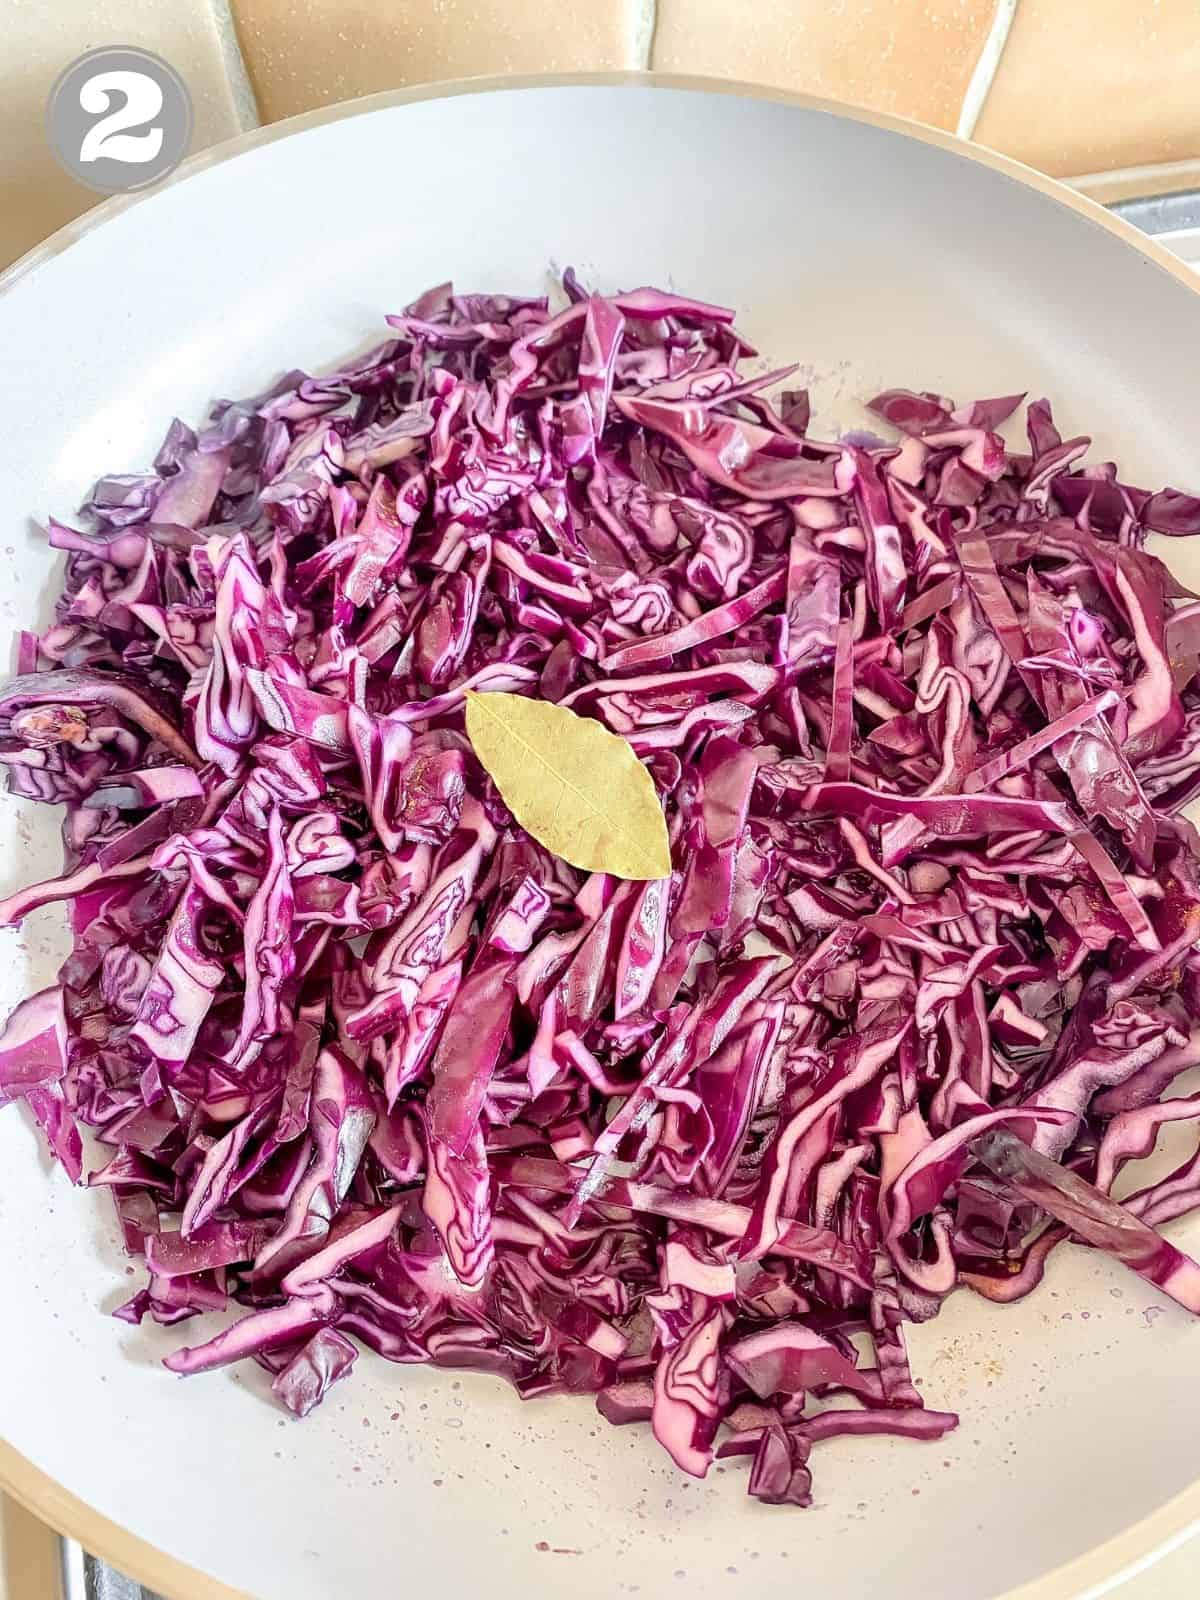 red cabbage and a bay leaf in a grey skillet labelled number two.